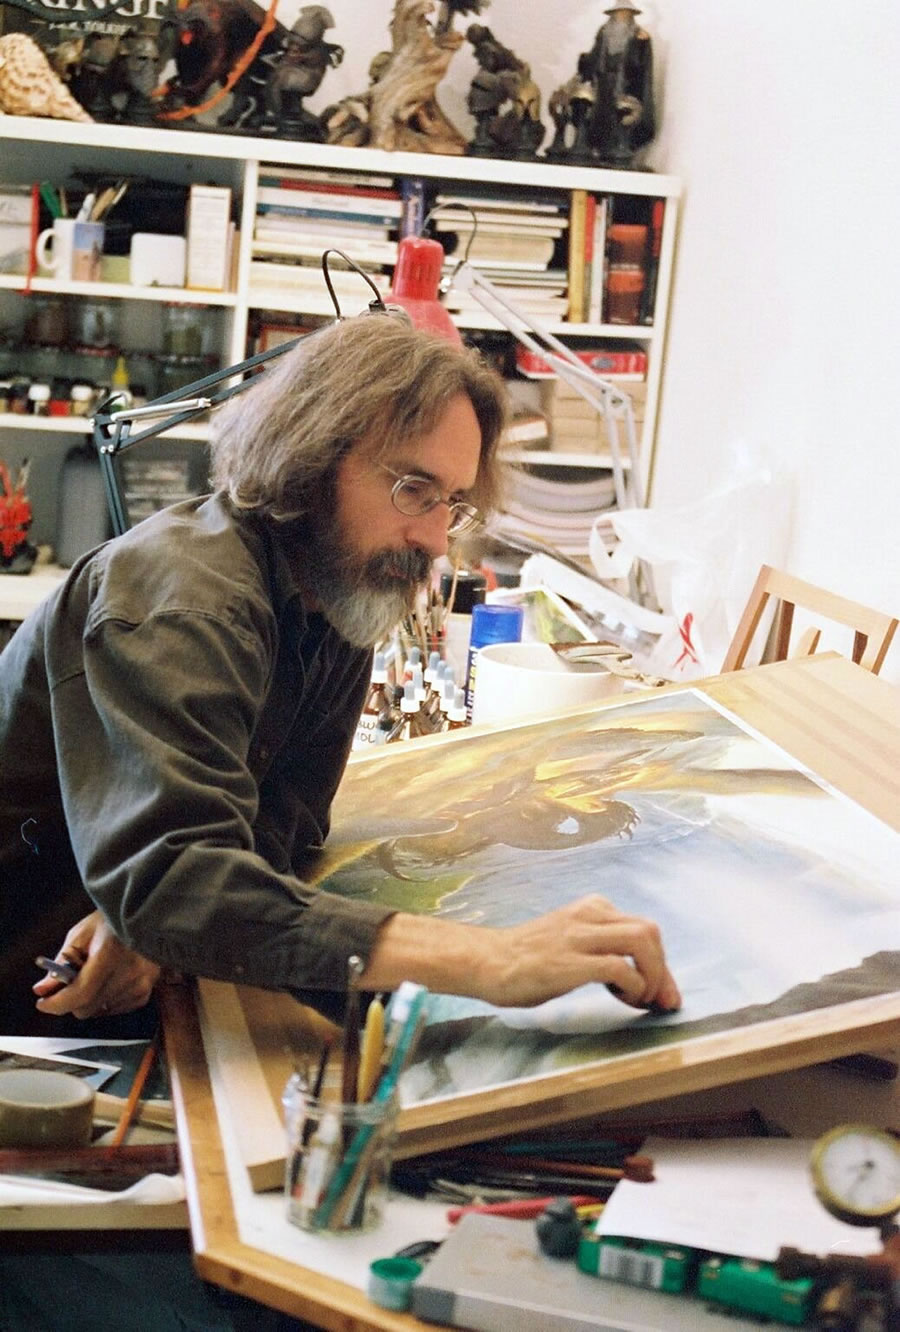 Tolkien illustrator John Howe will be one of the judges